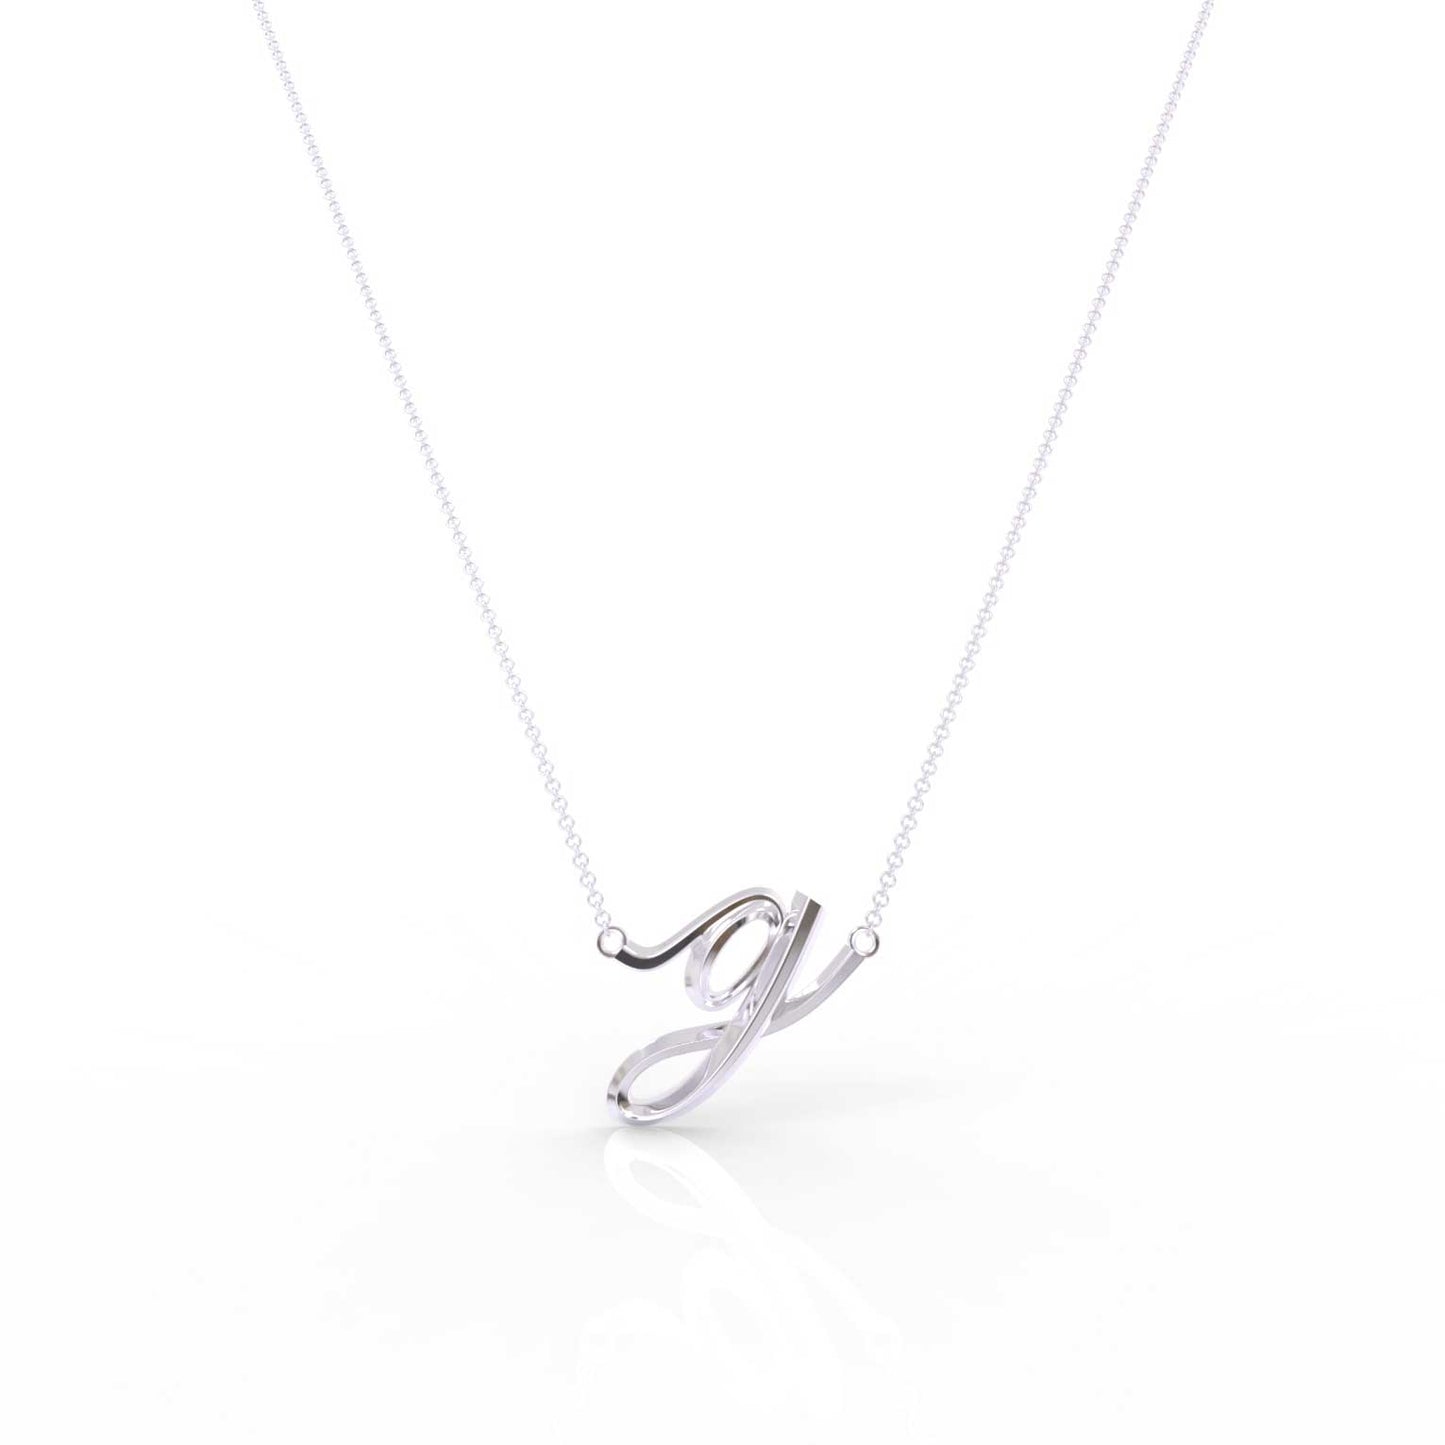 The Love Collect - "G" Necklace